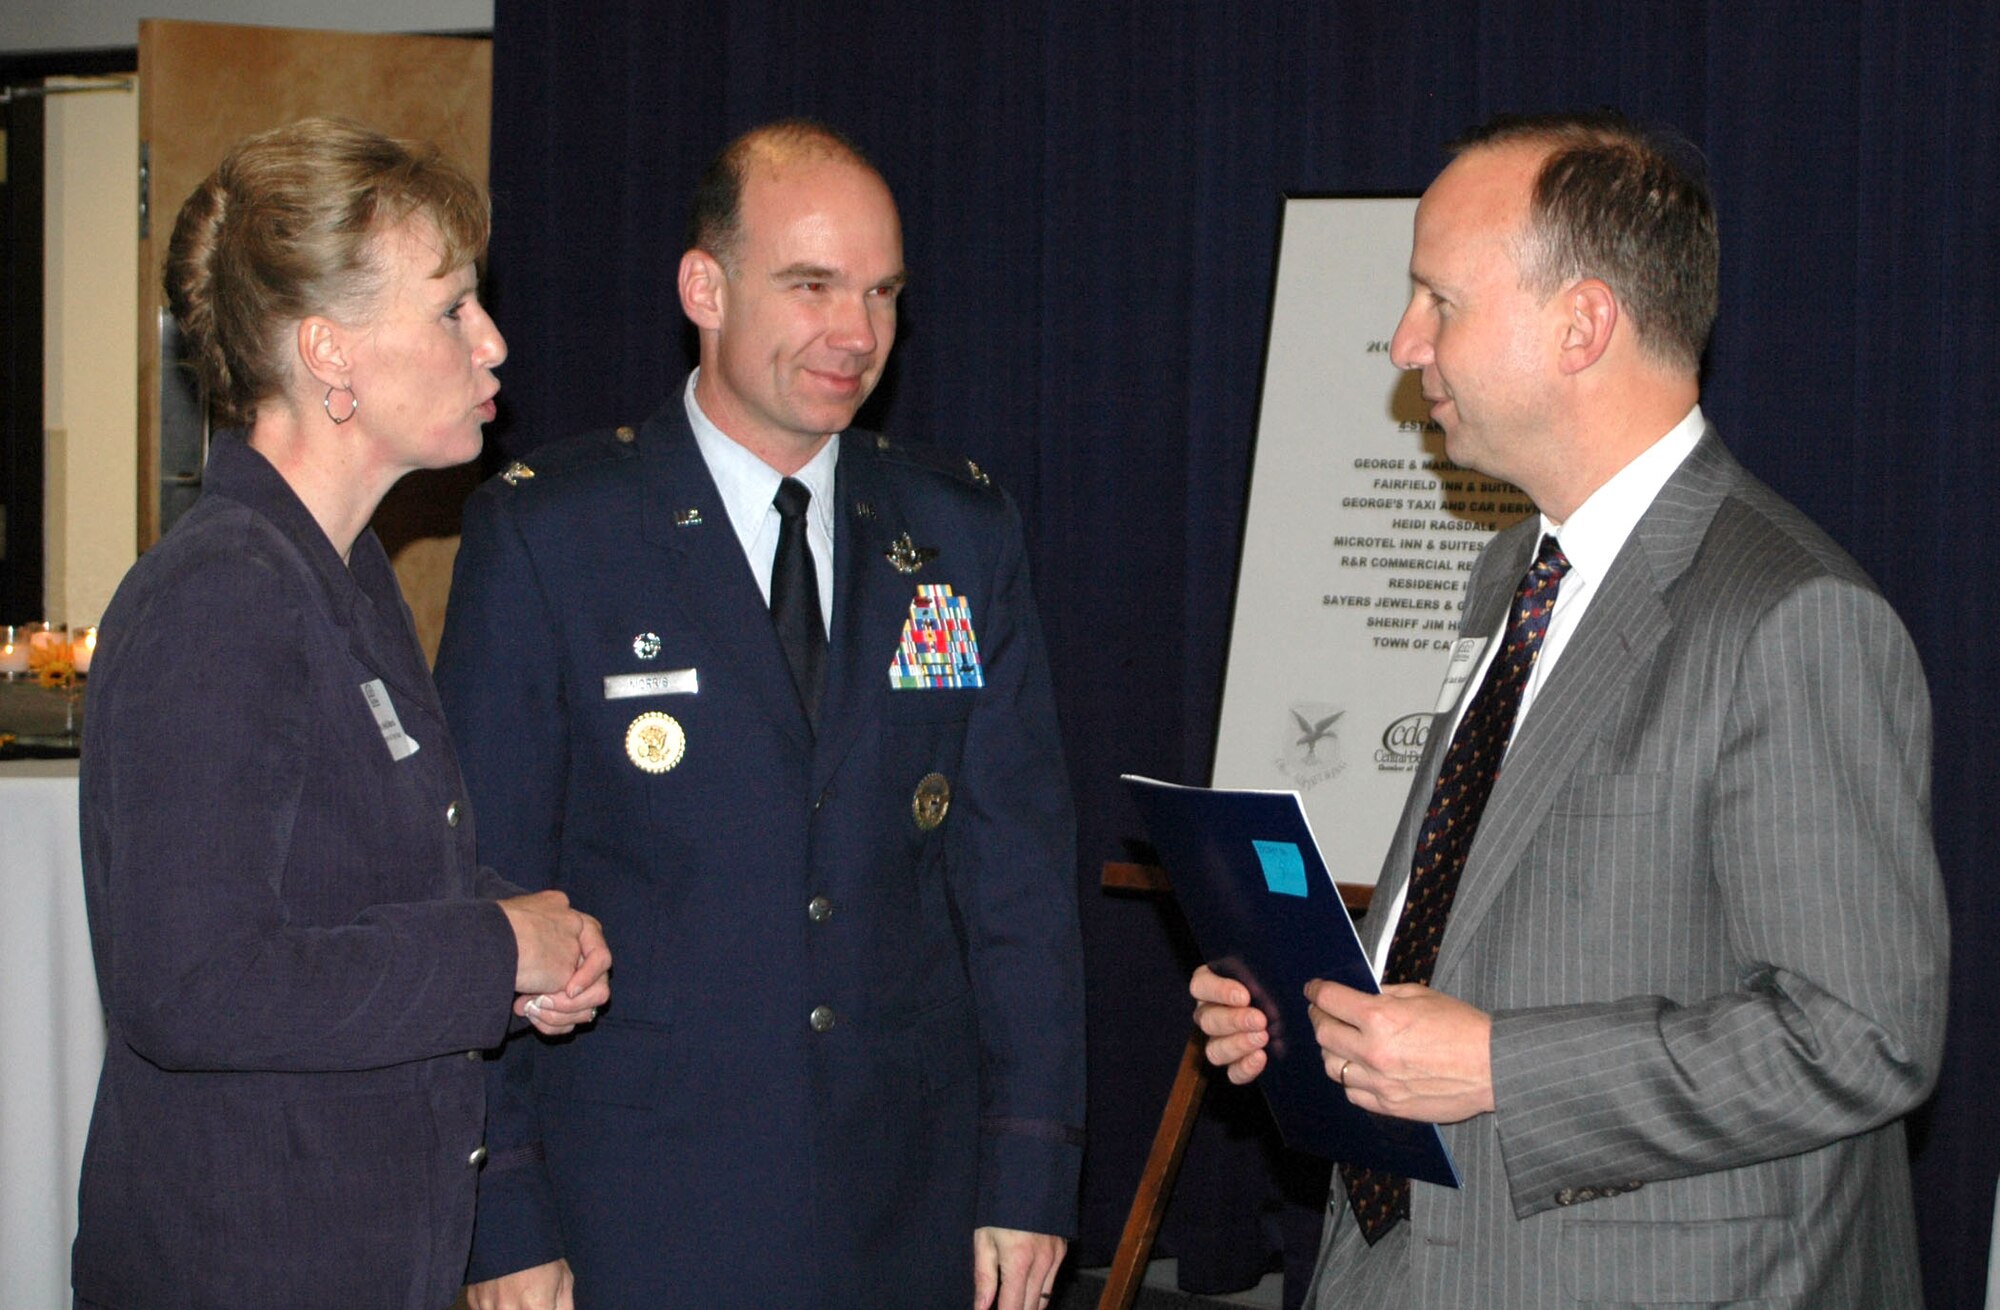 436th Airlift Wing Commander Col. Manson O. Morris and his wife Heidi speak to Delaware Governor Jack Markell at the Military Affaire at The Landings here Nov. 4. This annual event is hosted by the Central Delaware Chamber of Commerce and the Air Force Association's Galaxy Chapter. (U.S. Air Force photo/2nd Lt. Adam Gregory)
